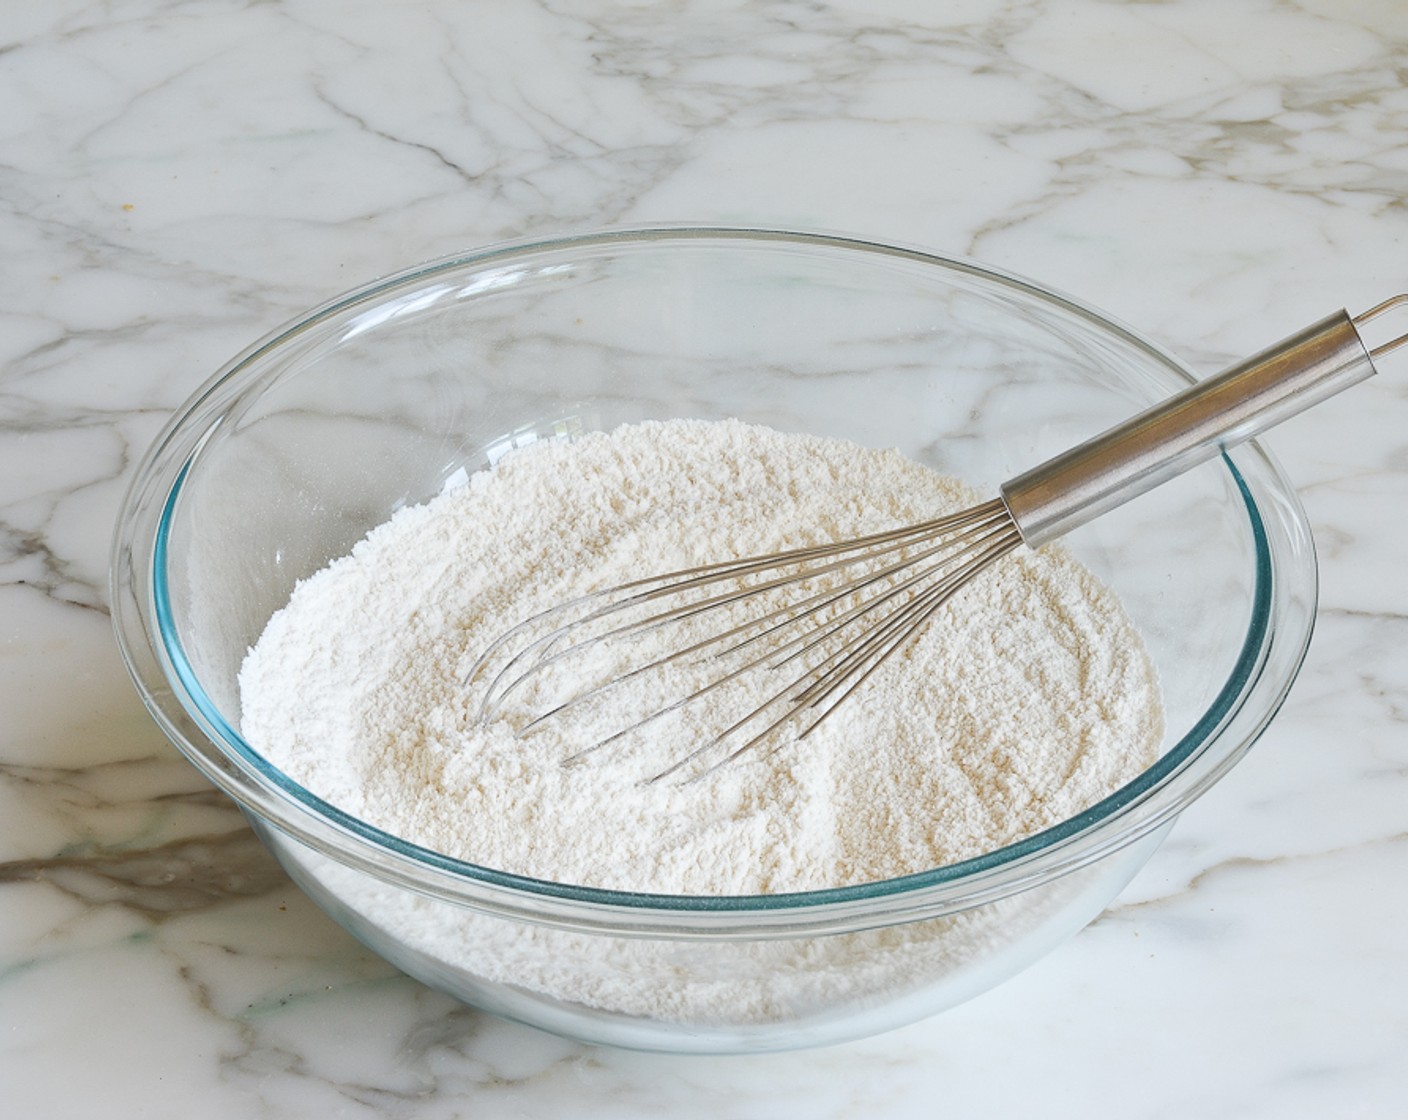 step 4 In another large bowl, whisk together the Unbleached All Purpose Flour (3 cups), Granulated Sugar (2 Tbsp), Baking Powder (1 1/4 tsp), Baking Soda (1/2 tsp), and Salt (1/2 tsp).